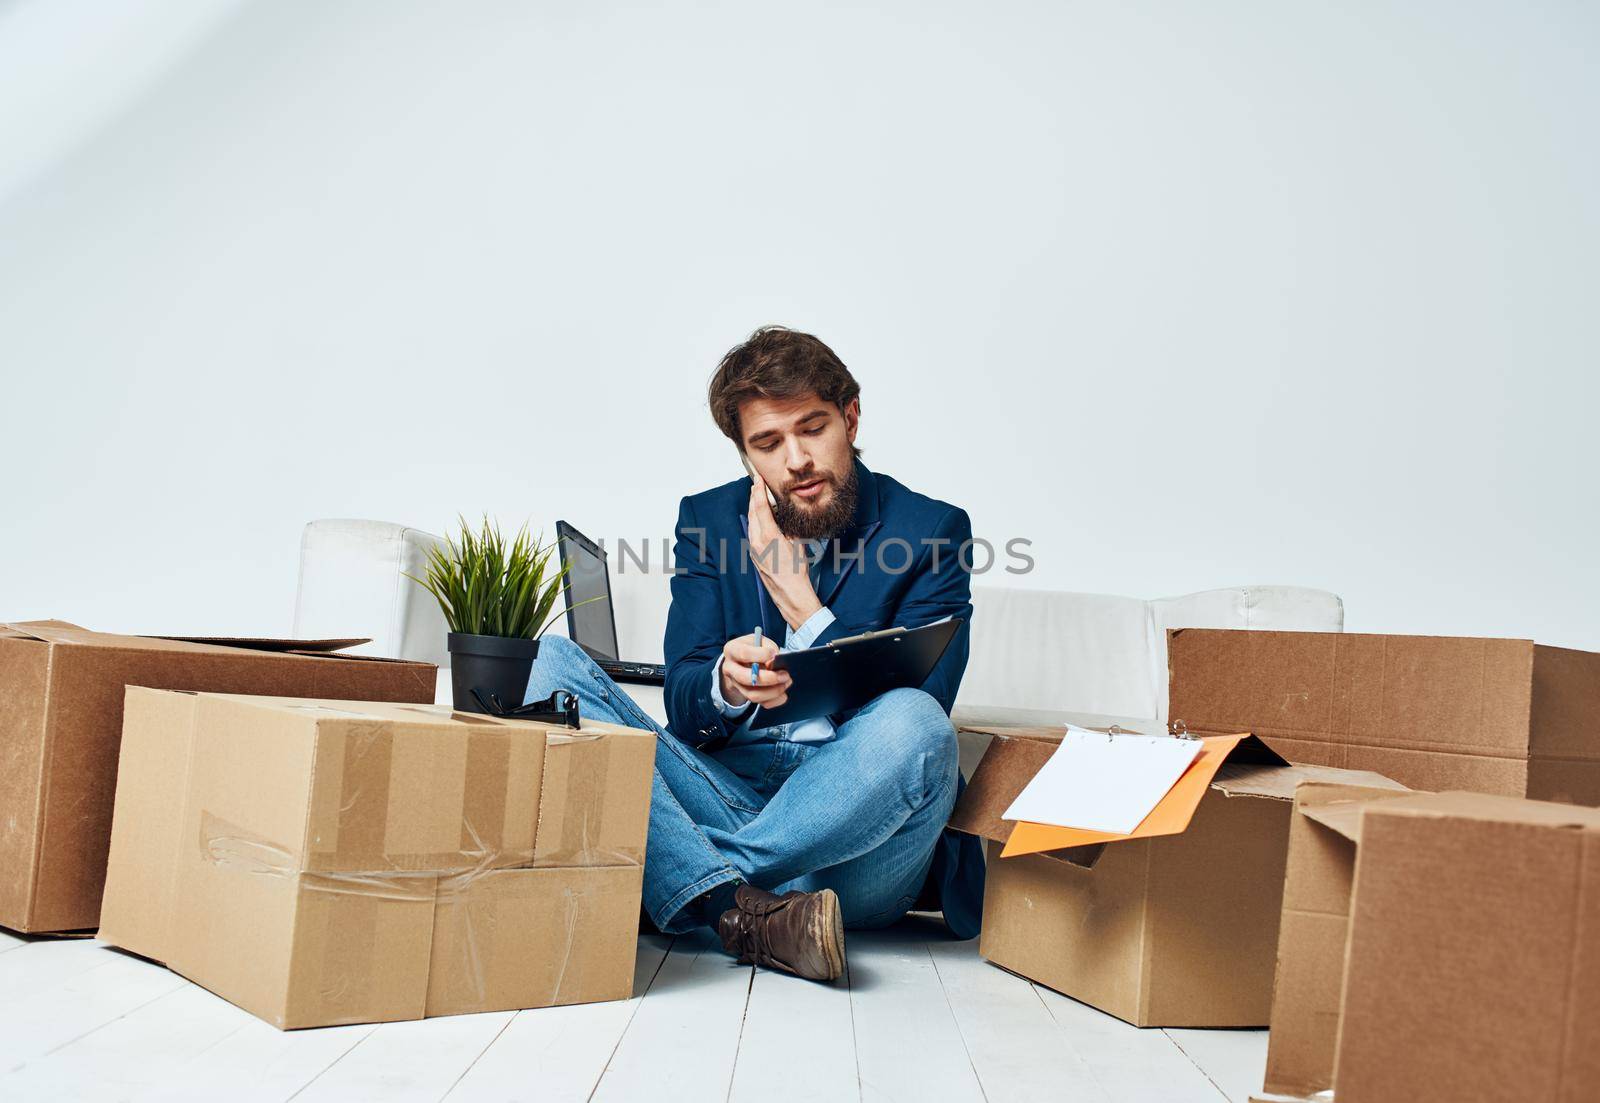 A man in a suit boxes with things communicating on the phone office official unpacking. High quality photo